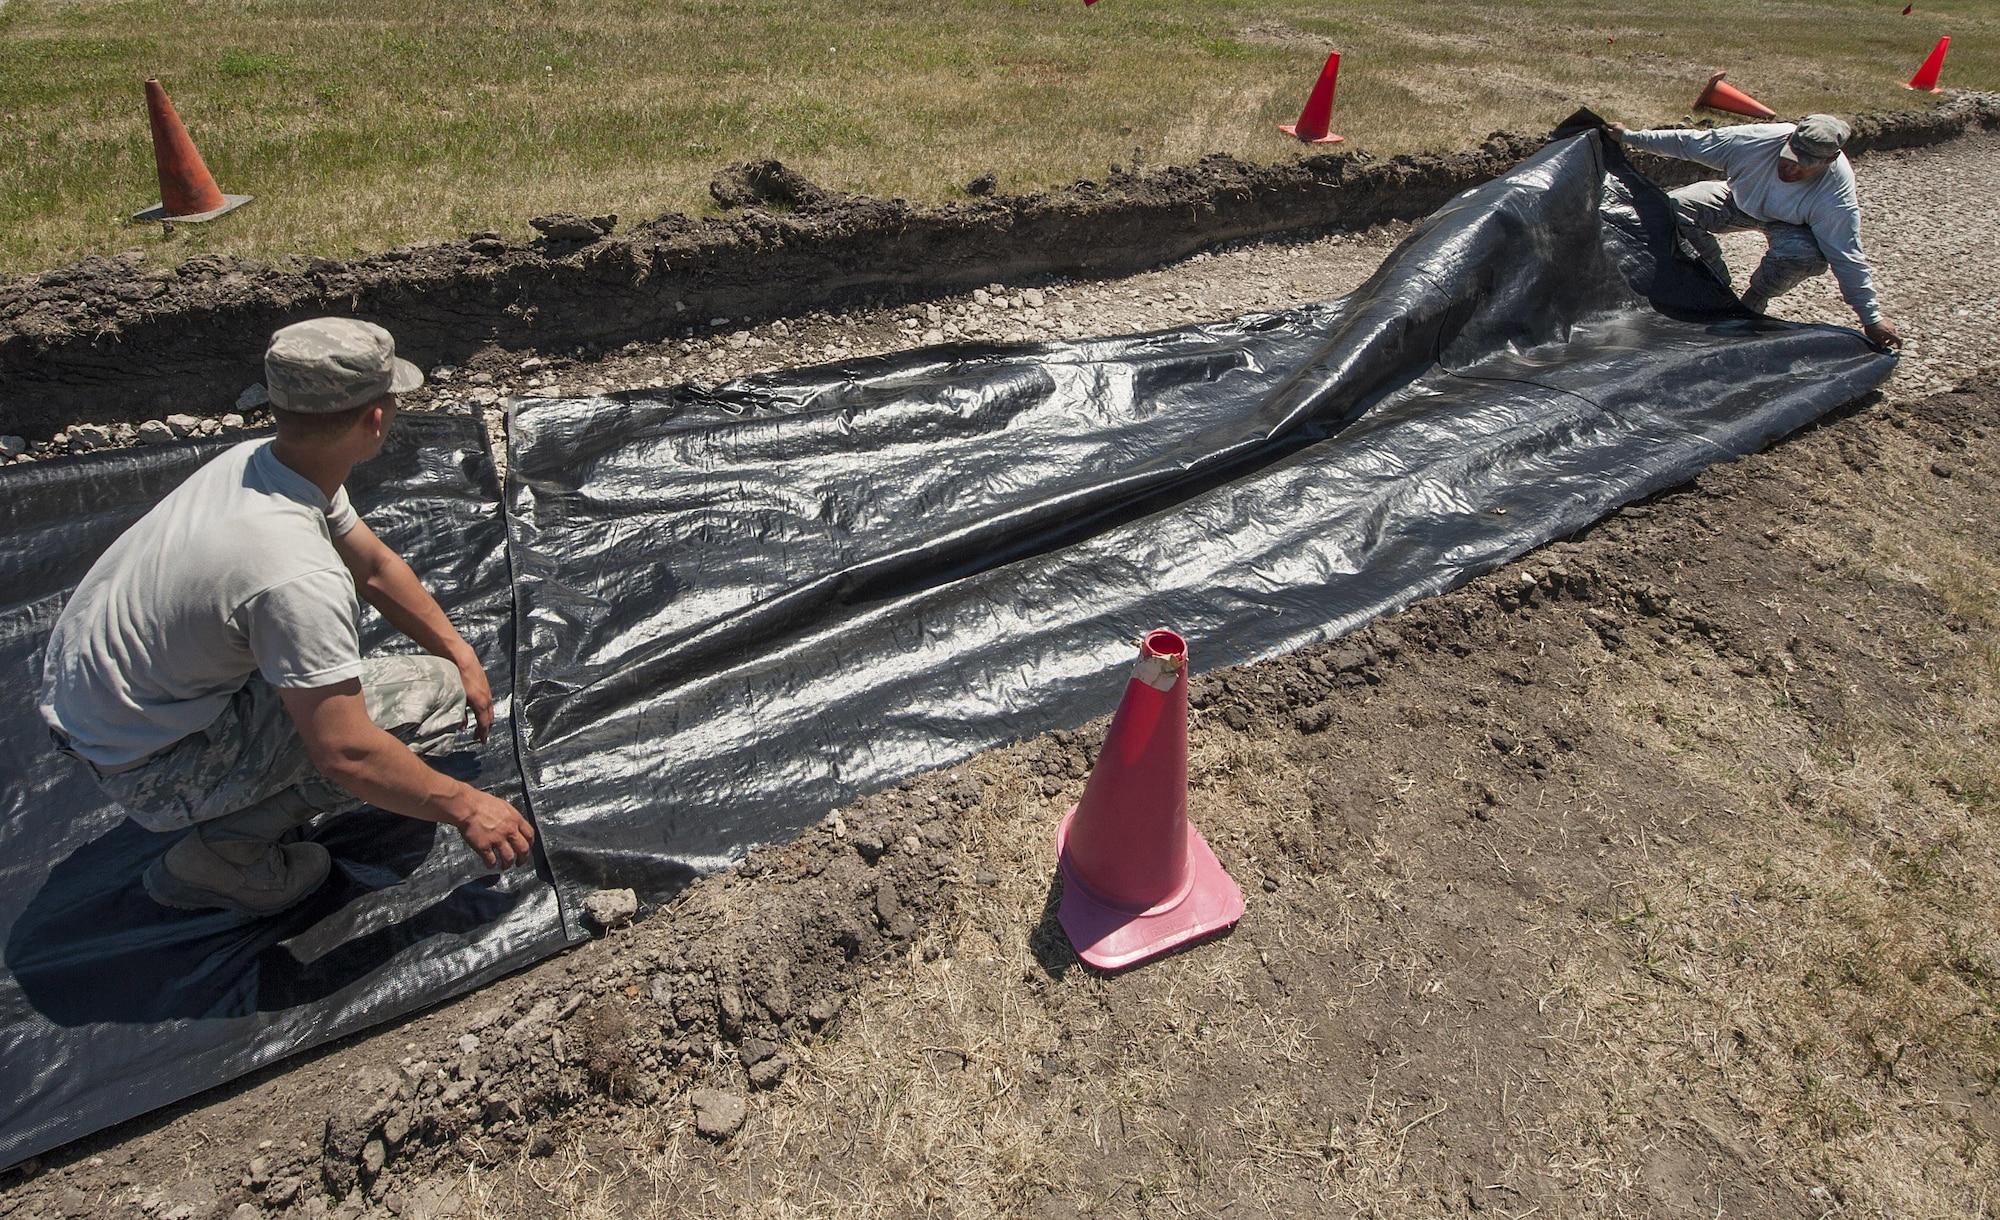 From left, Airman 1st Class Christopher Schroeder and Senior Airman Thomas Clark, 5th Civil Engineer Squadron pavements and equipment technicians, cover geotextile over the ground at Minot Air Force Base, N.D., June 12, 2017. Geotextiles are permeable fabrics used in conjunction with soil to separate, filter, reinforce, protect and drain water. (U.S. Air Force photo by Airman 1st Class Jonathan McElderry)